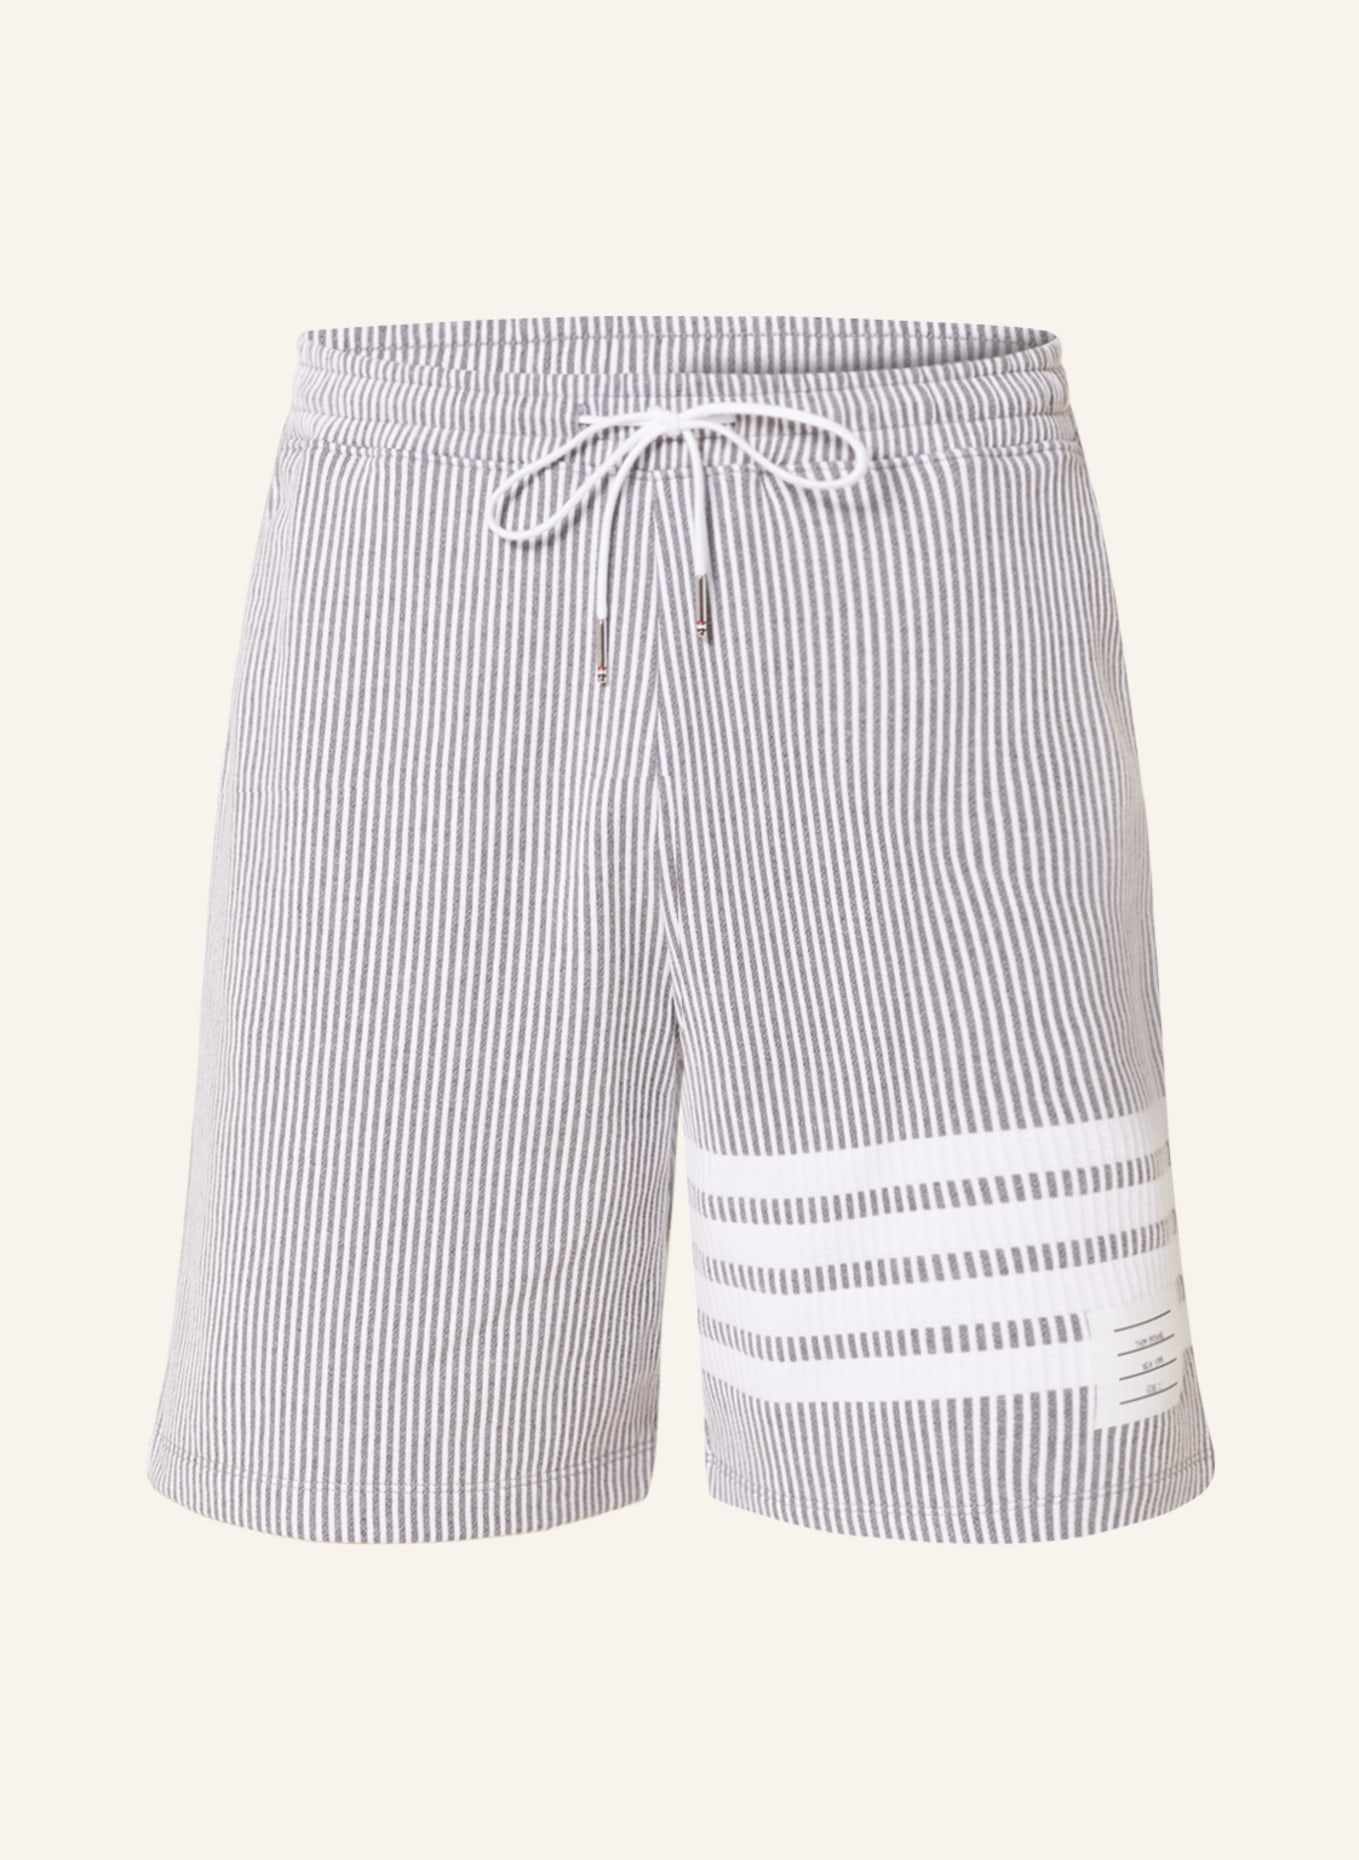 THOM BROWNE. Sweat shorts, Color: GRAY/ WHITE (Image 1)